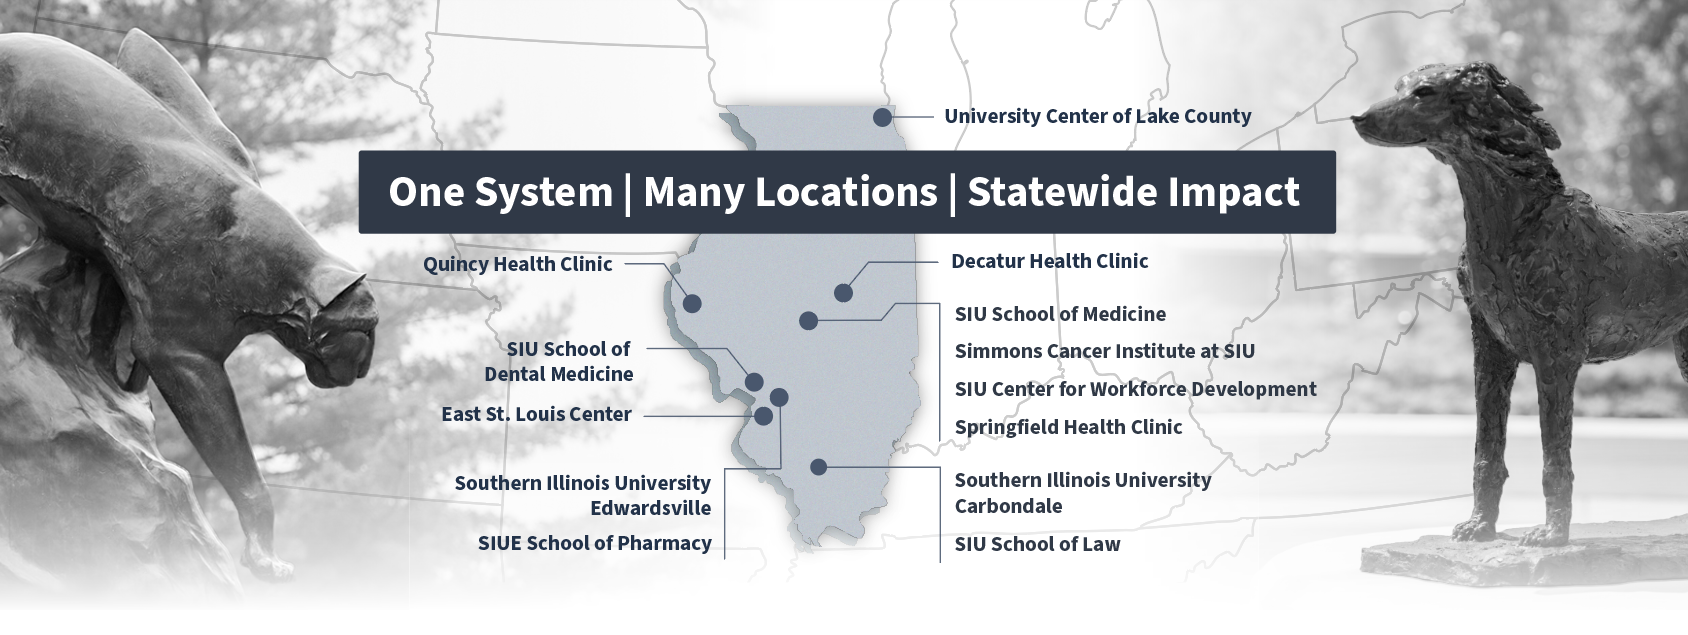 One University, Two Campuses, Many Locations